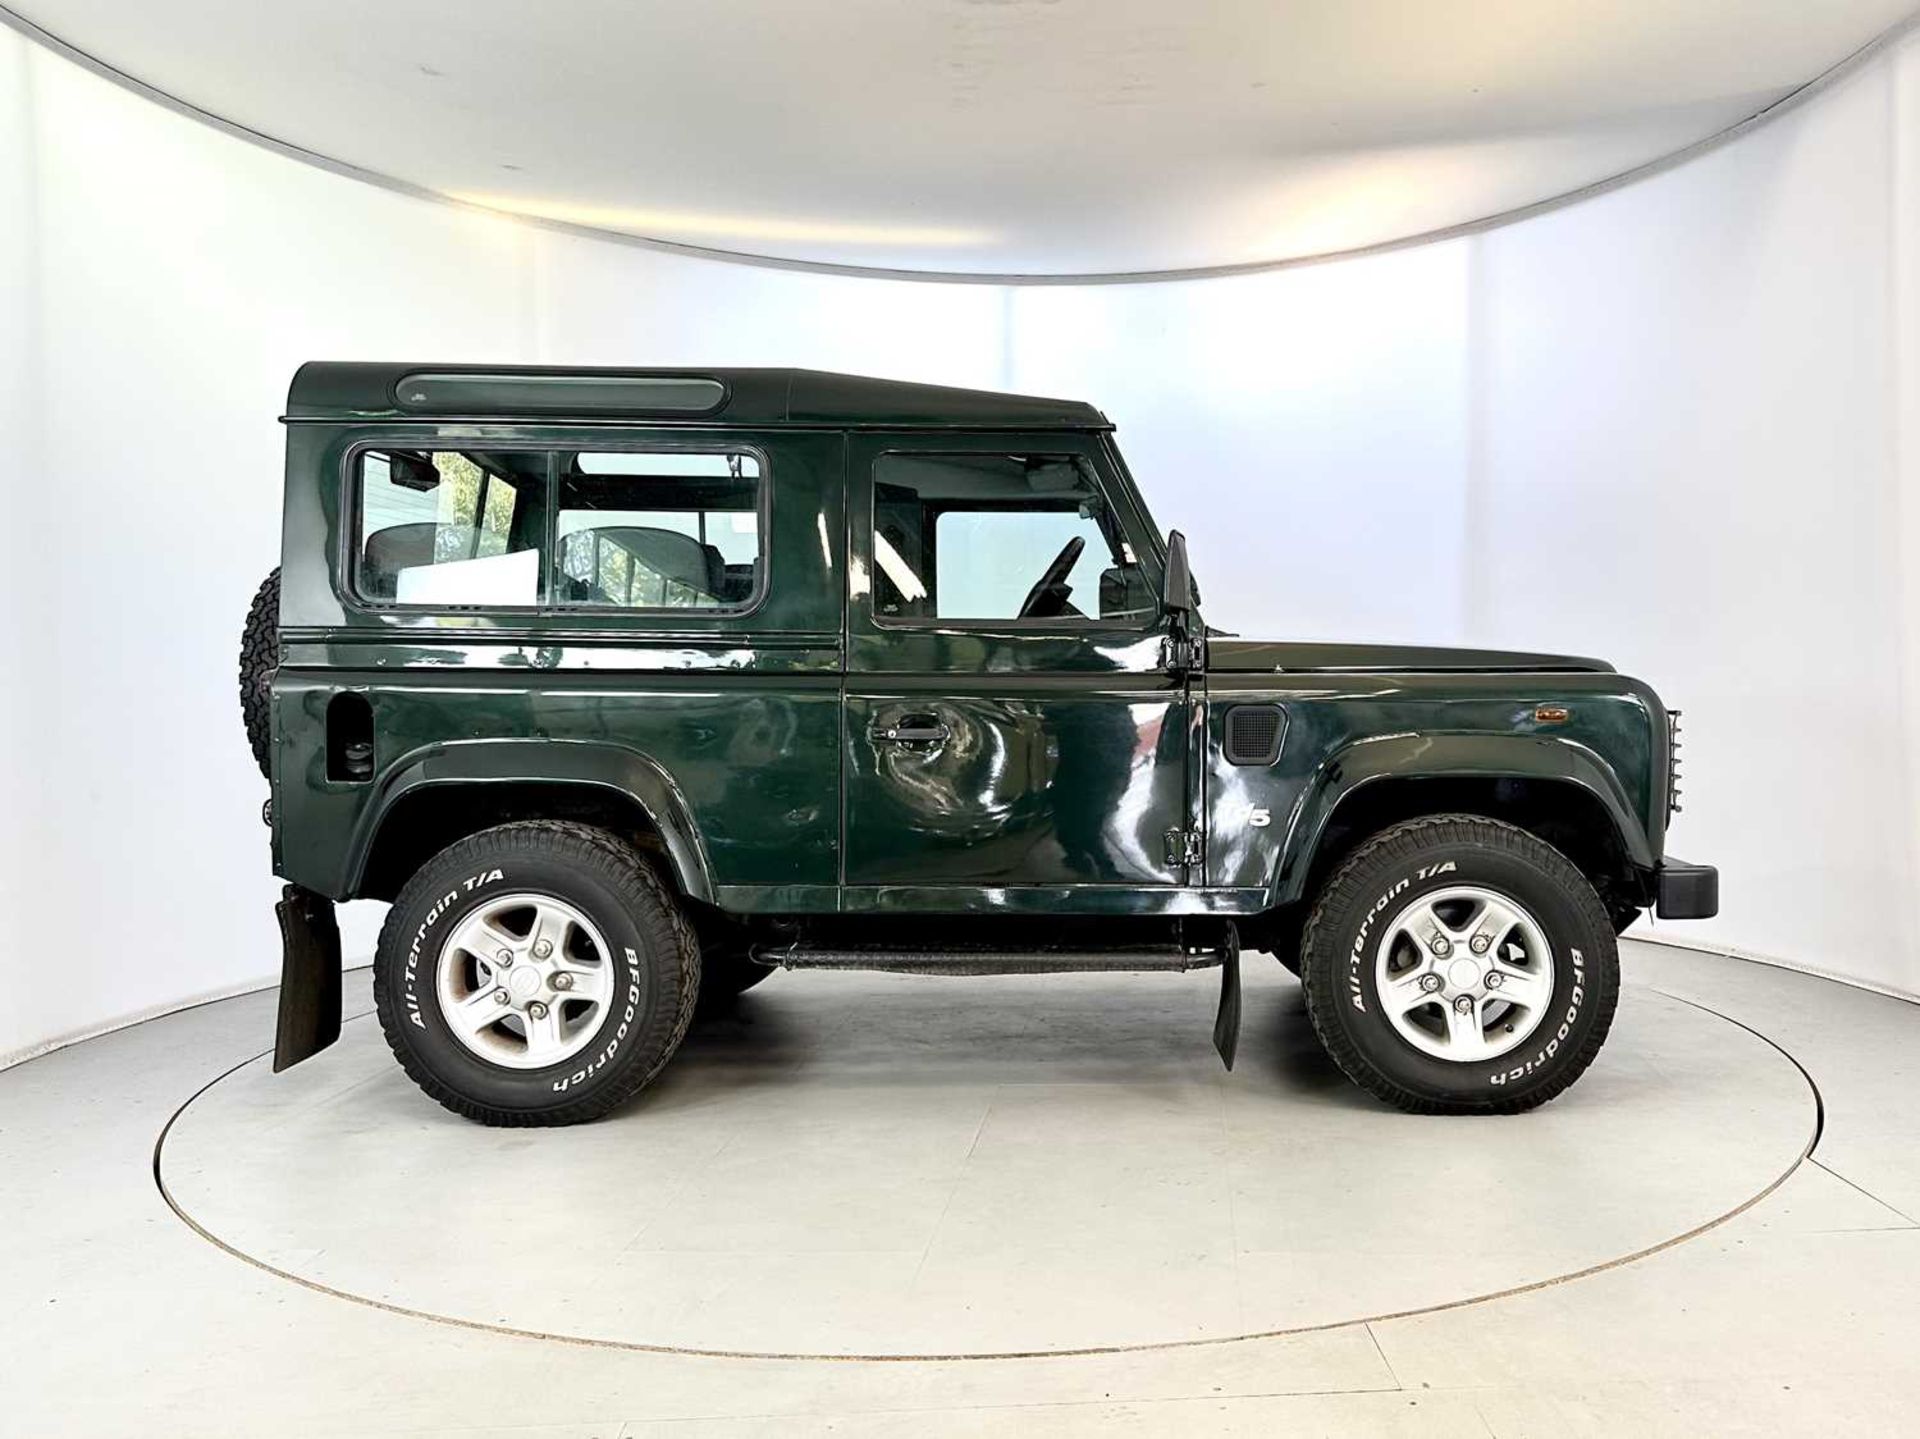 2002 Land Rover Defender 90 TD5 County - Image 11 of 28